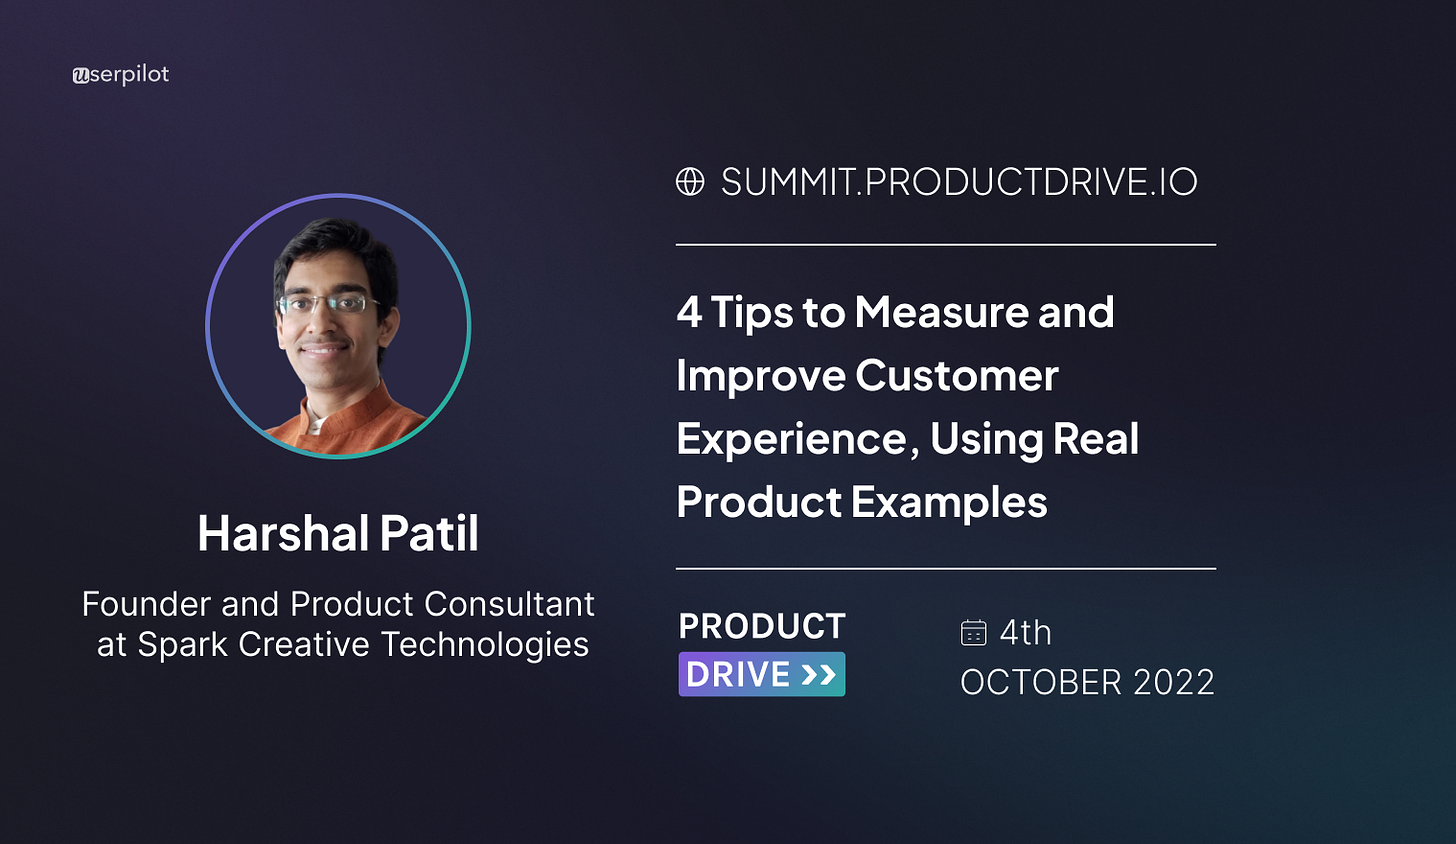 Introductive Announcement for Harshal Patil to present at Upcoming Product Drive Summit